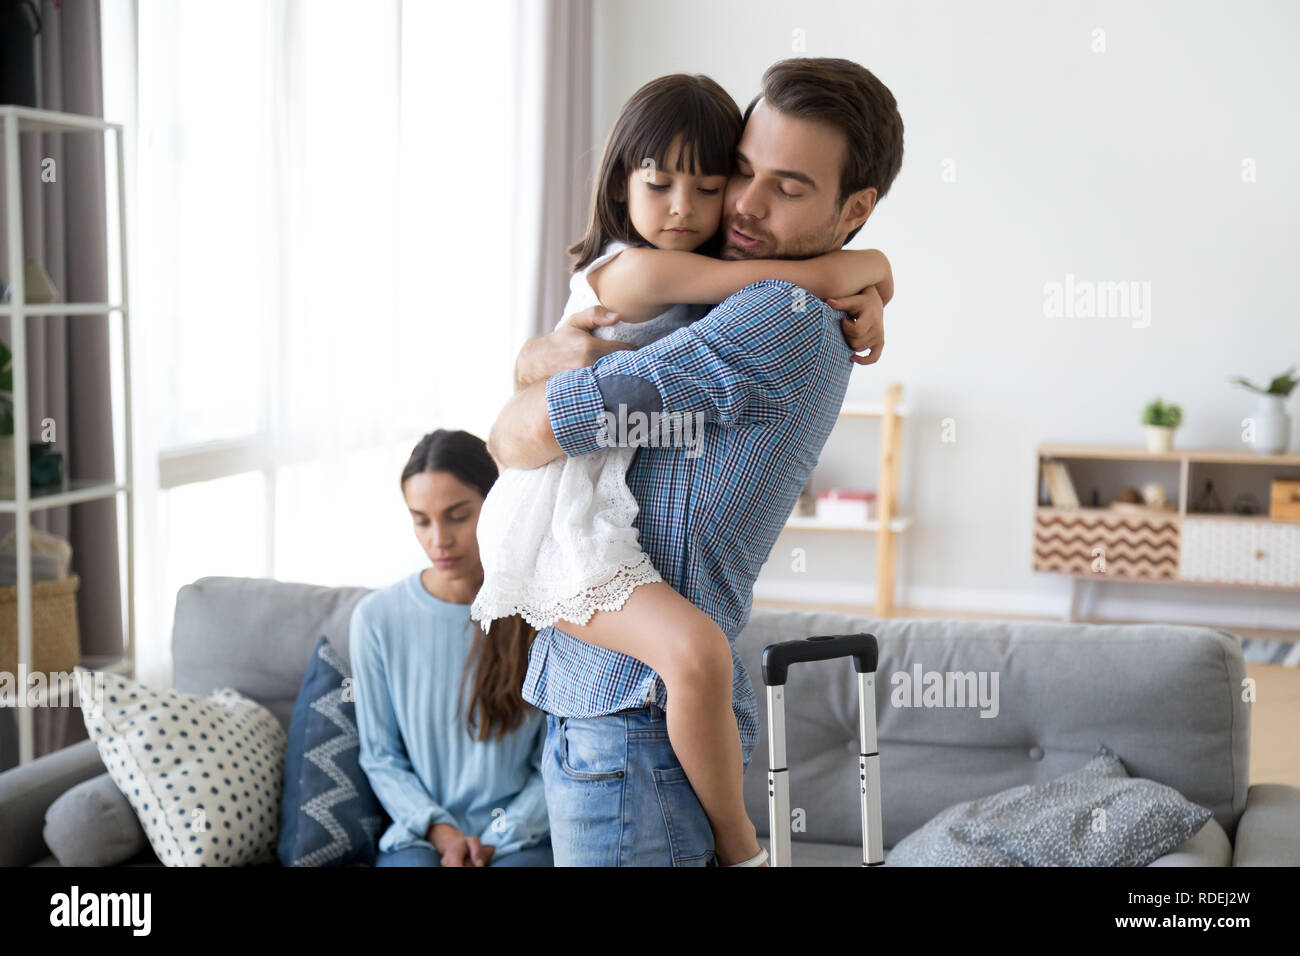 Sad little girl upset by father leaving embracing dad Stock Photo